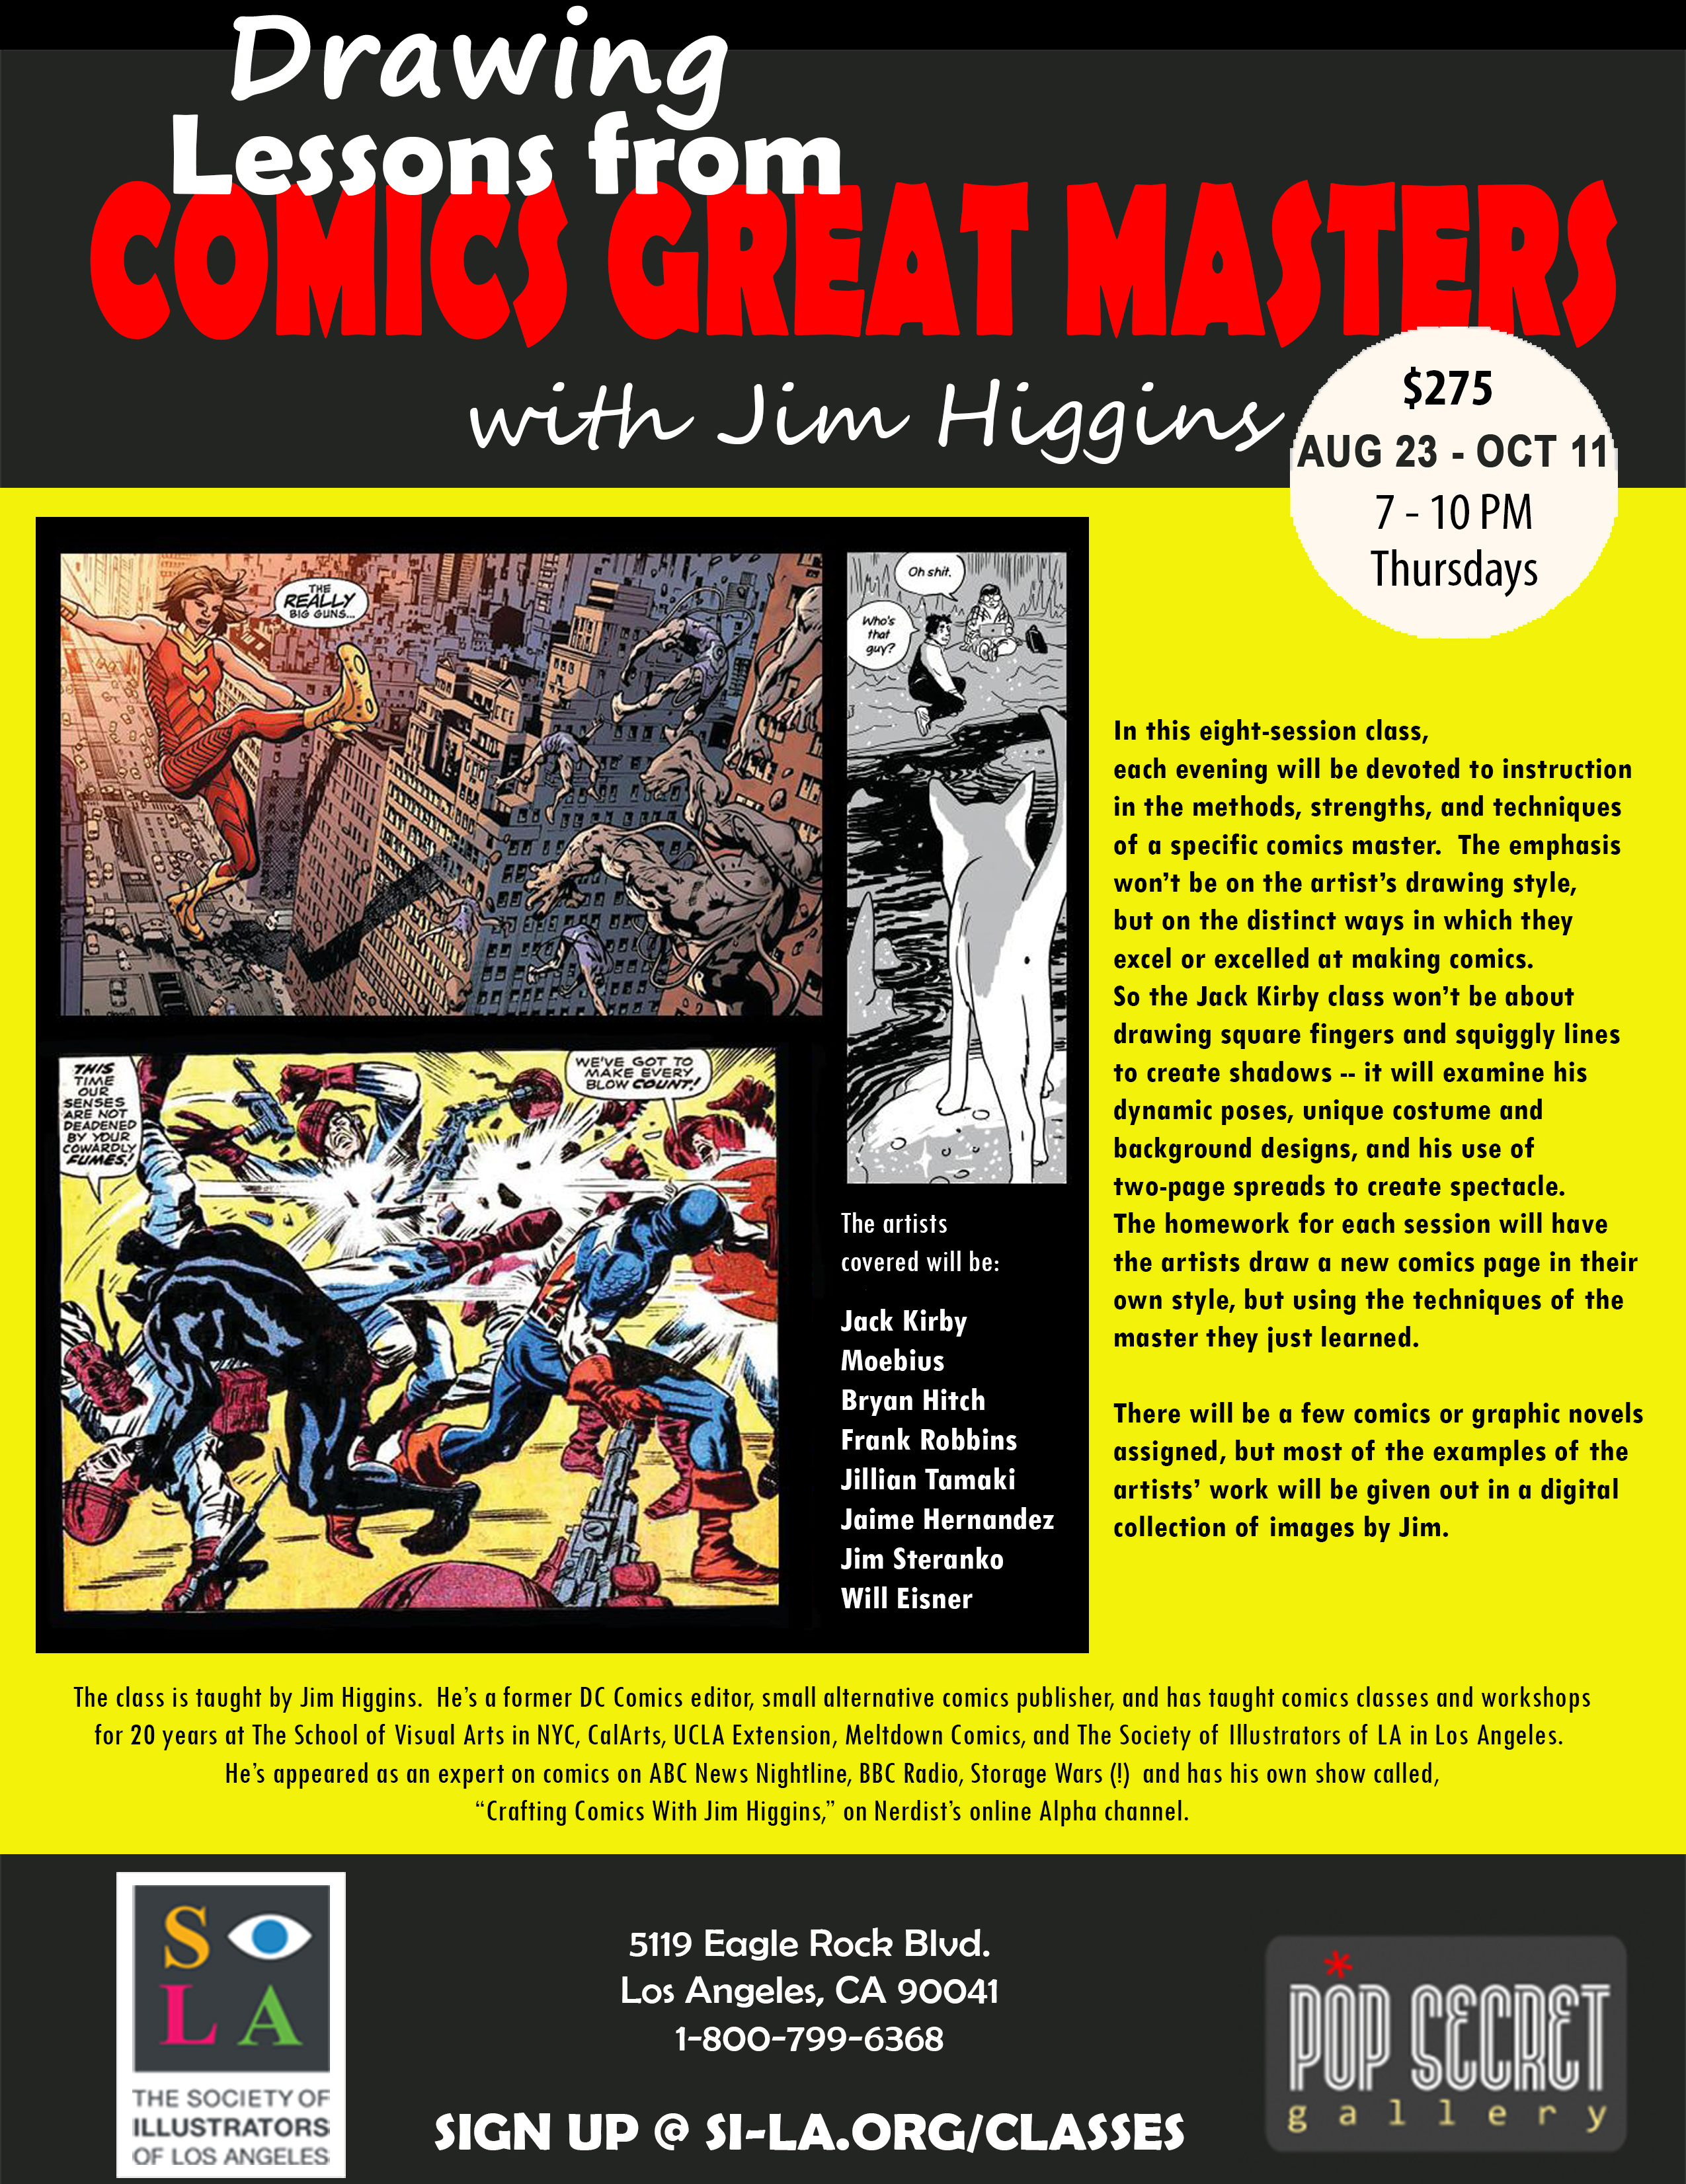 NEXT WEEK! Jim Higgins: Drawing Lessons from Great Comics Masters Aug. 23 – Oct. 11